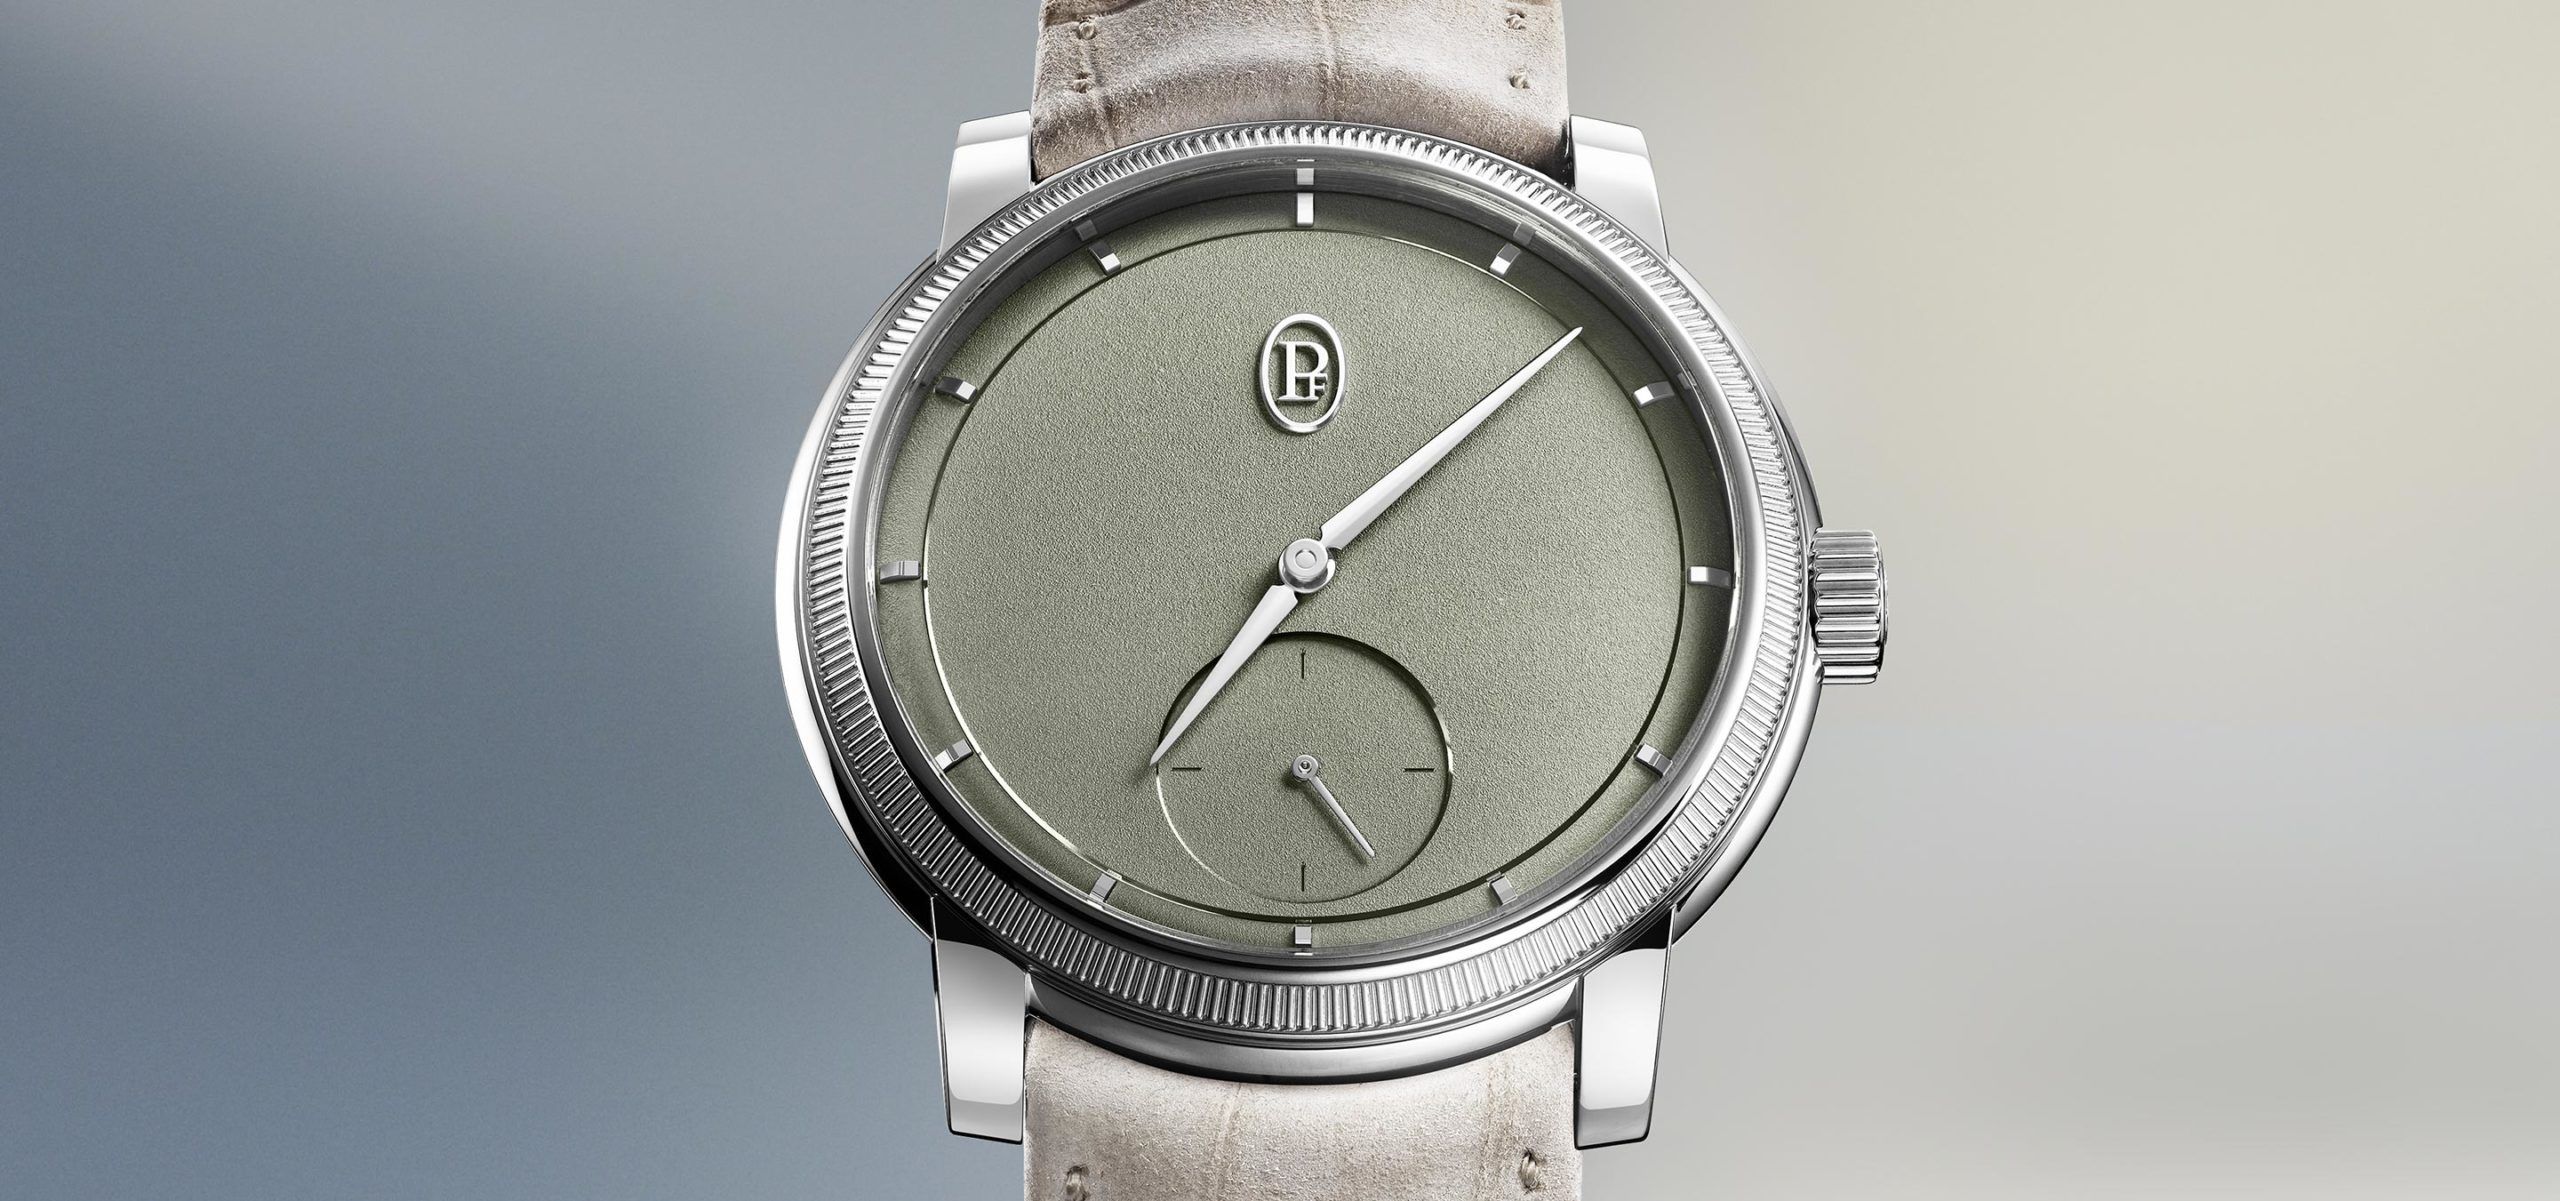 Slivers Of Gold And Platinum: Parmigiani Fleurier Expand Their Iconic Toric Line